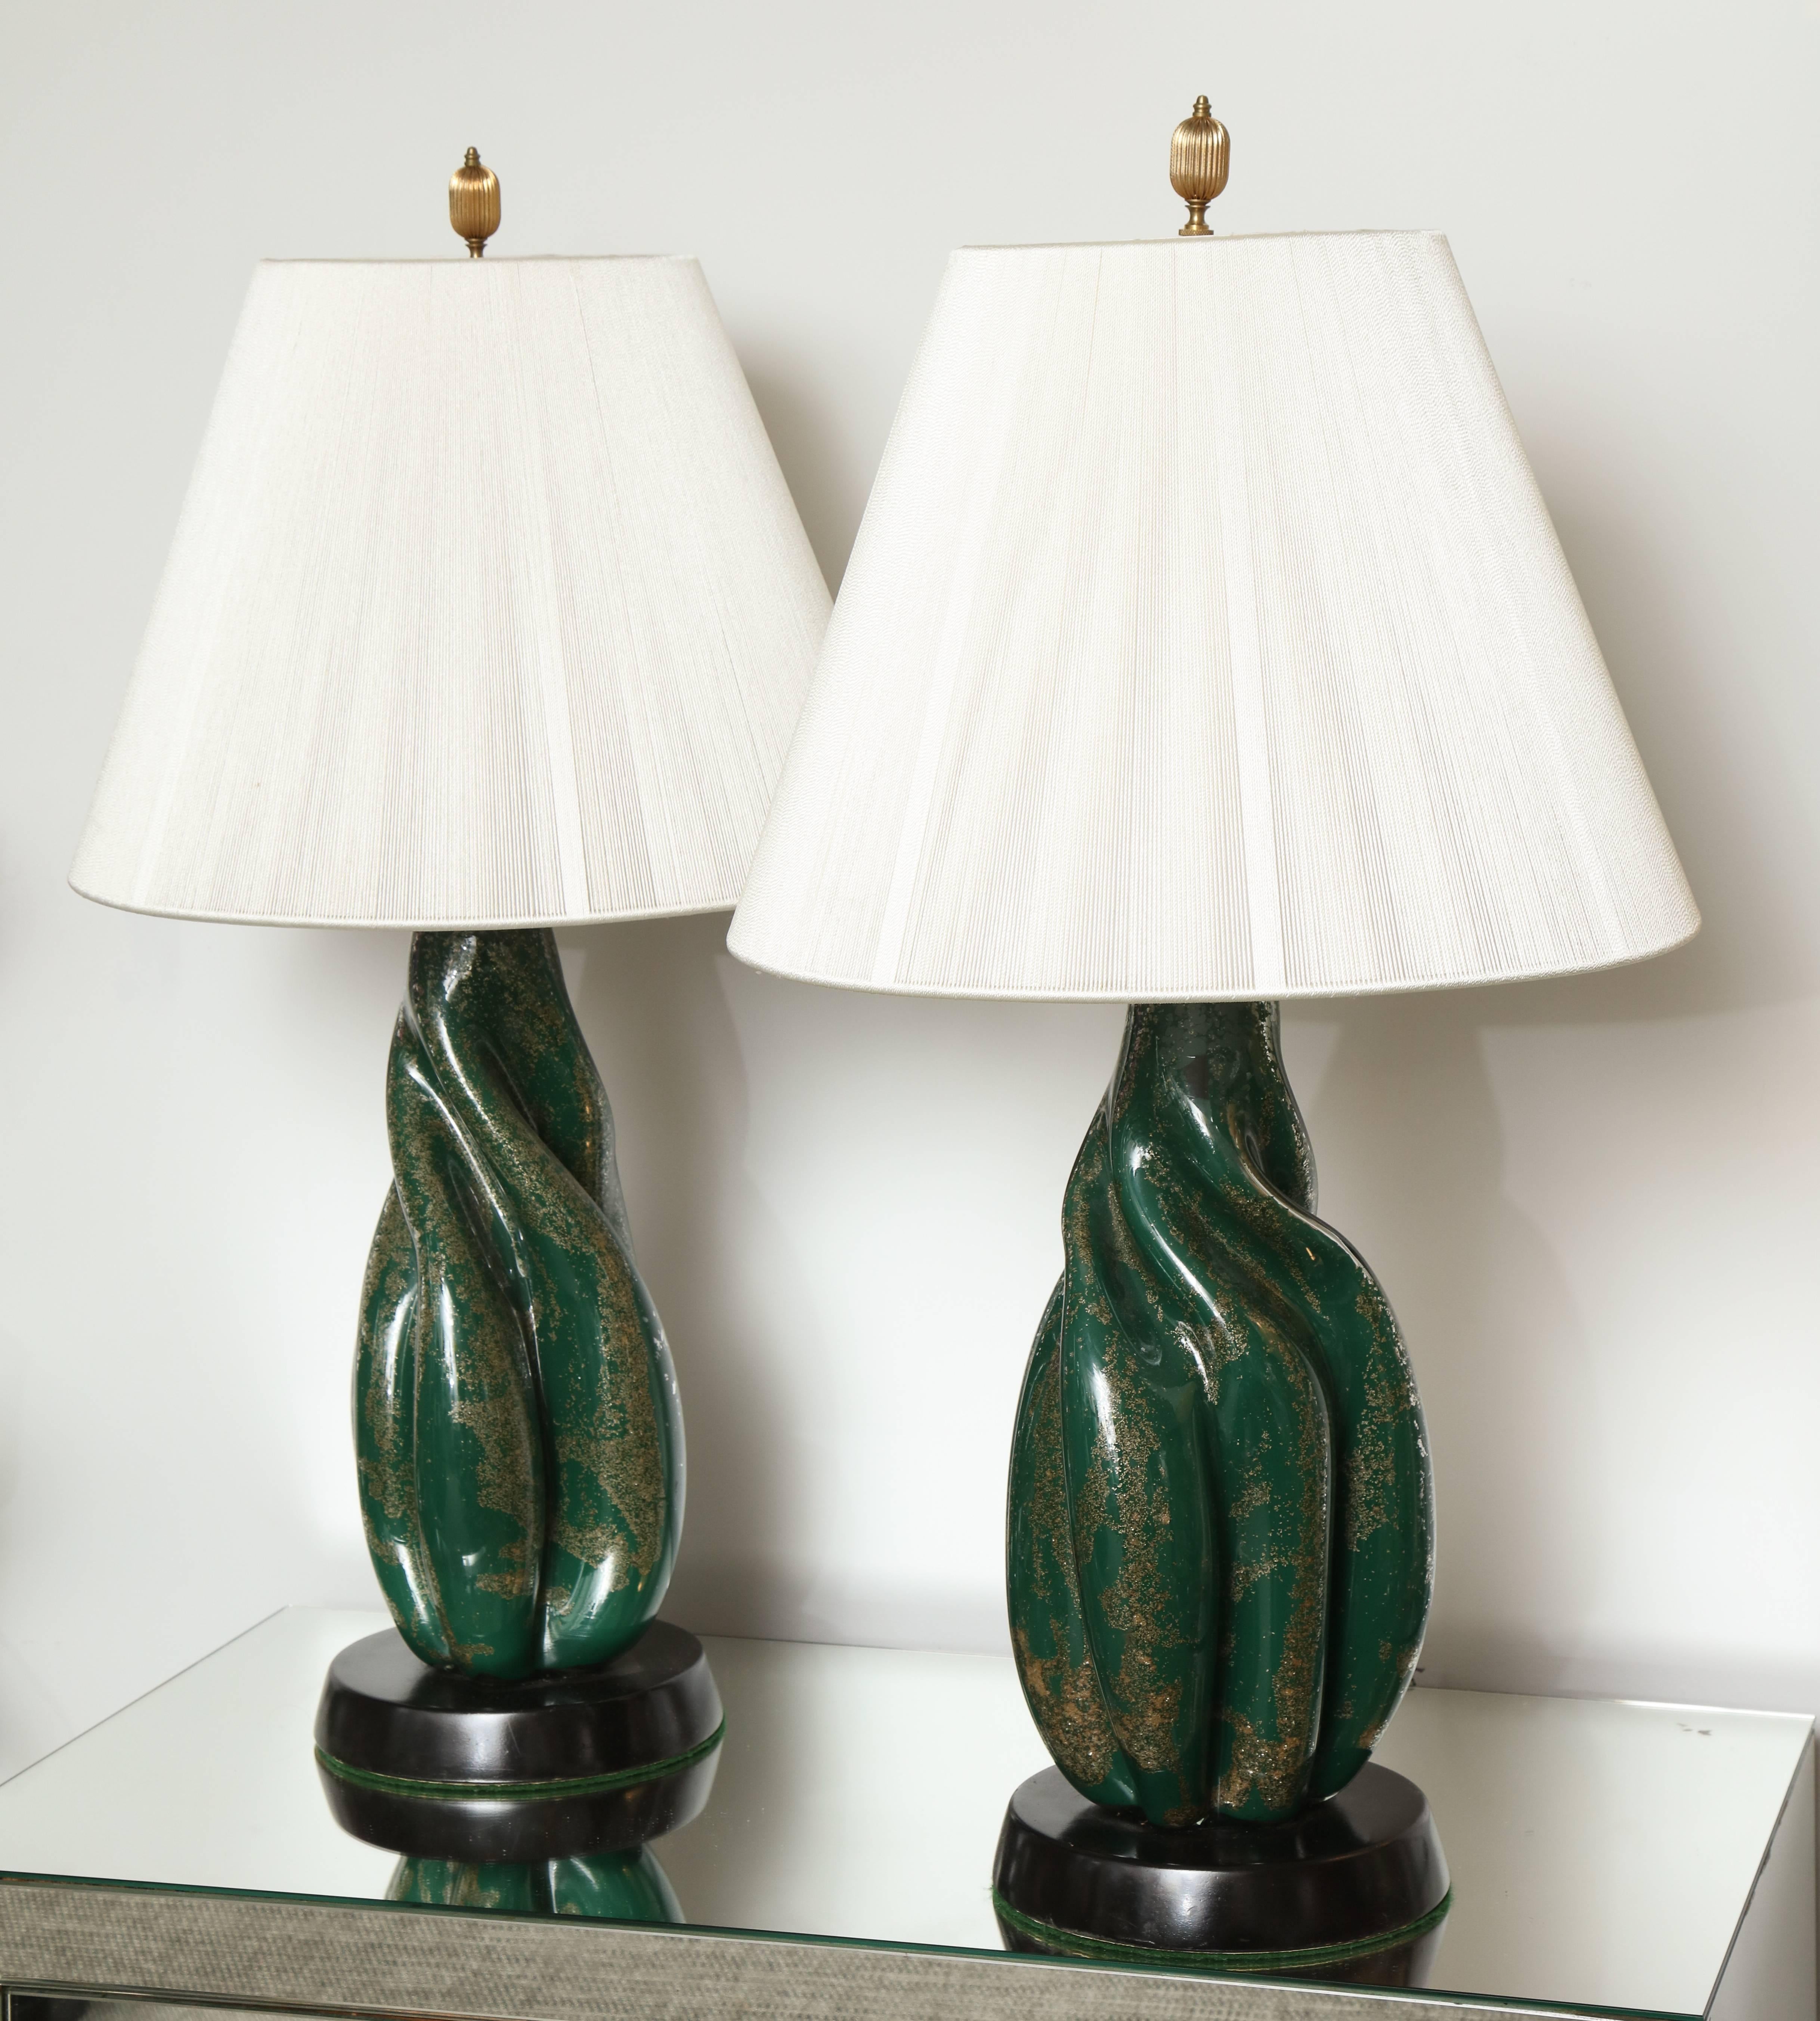 A wonderful pair of Murano lamps in green and silver/gold flecks cased in glass with a twist on a black base.